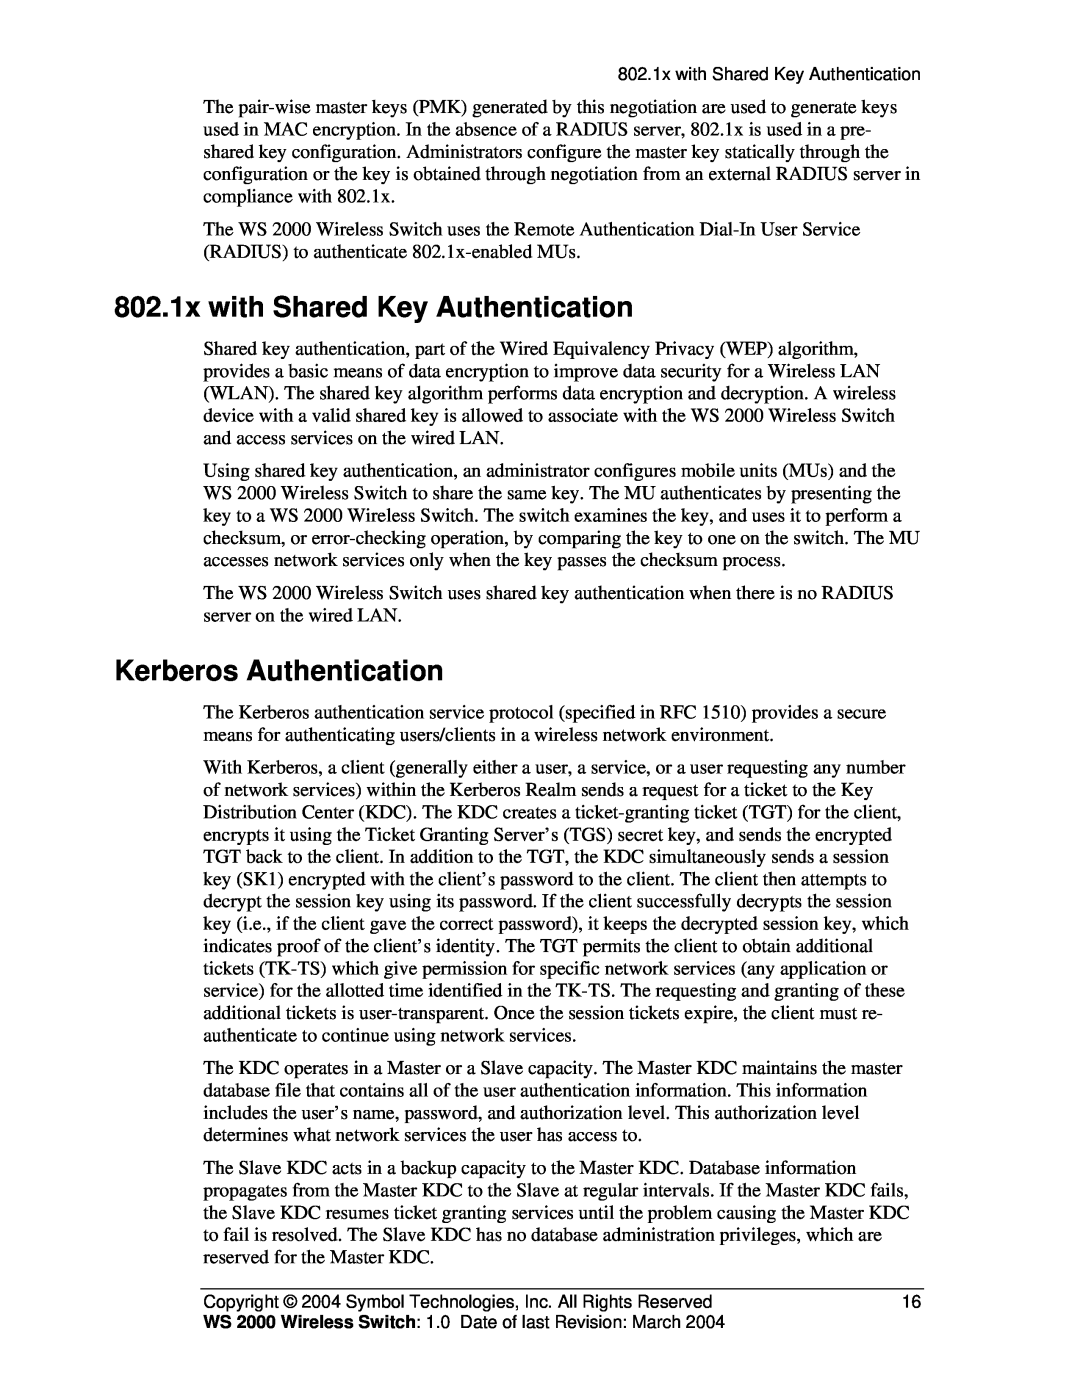 Symbol Technologies WS 2000 manual 802.1x with Shared Key Authentication, Kerberos Authentication 